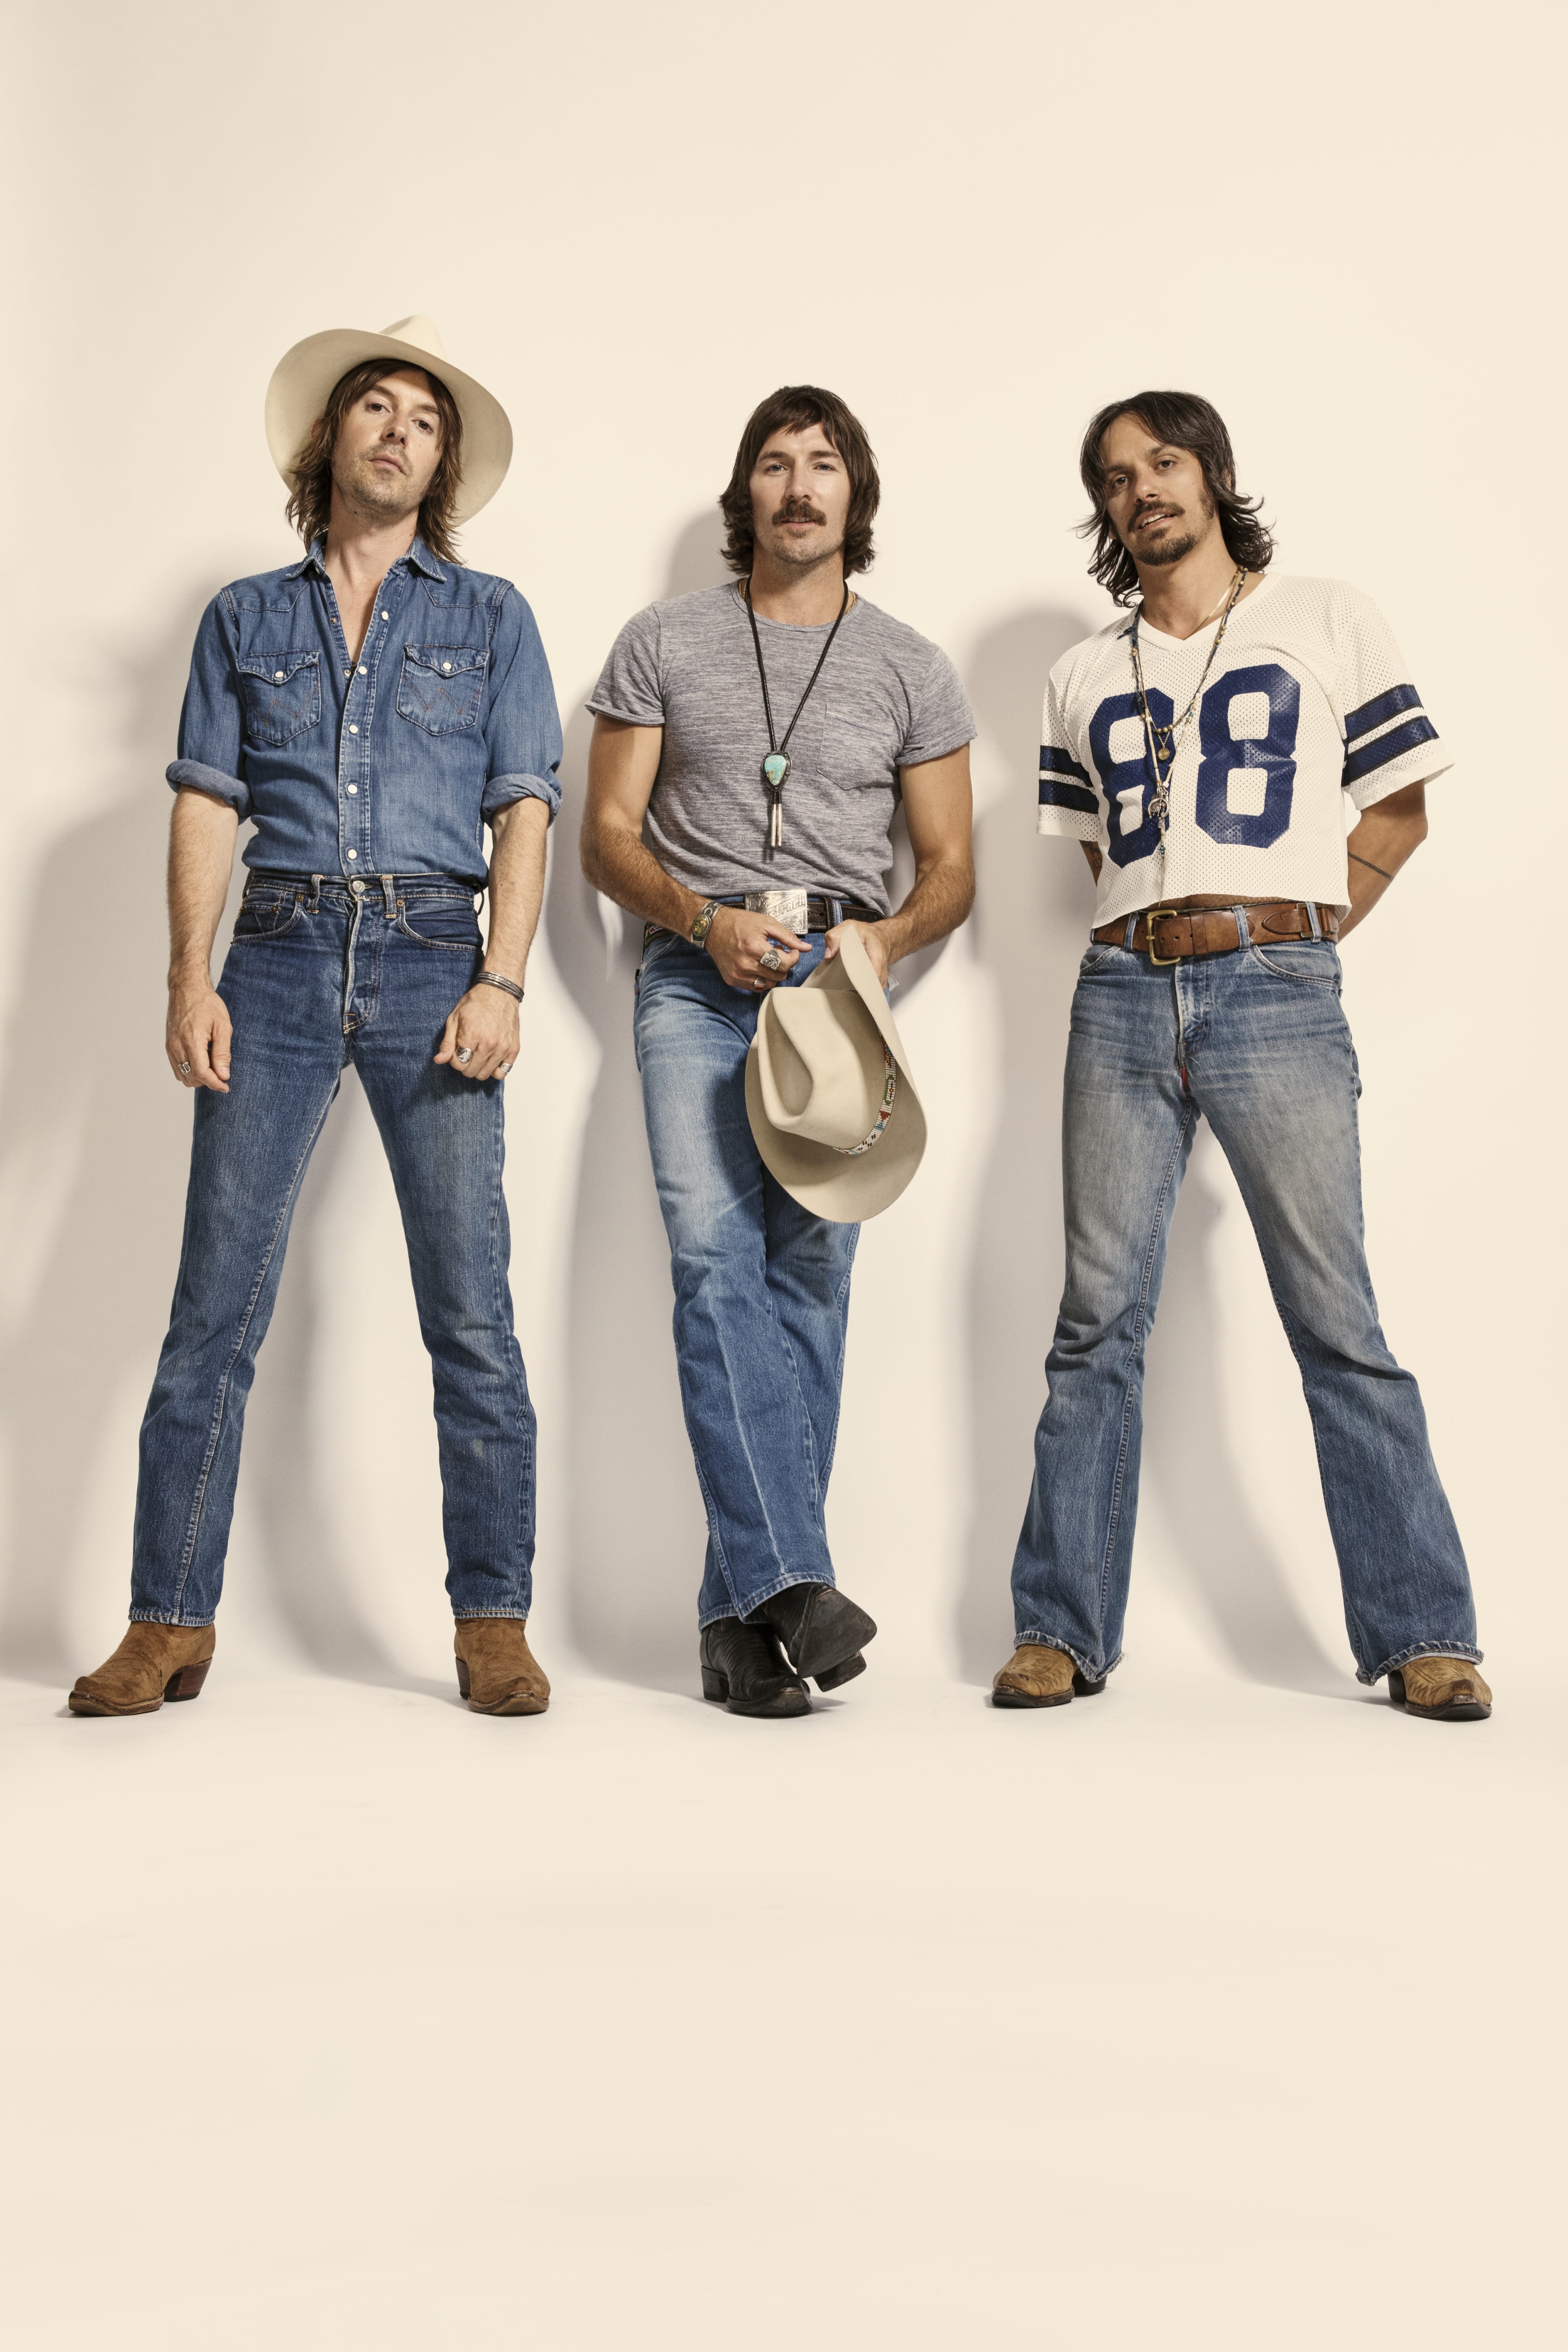 Listen To New Midland Song “Nothin’ New Under The Neon”